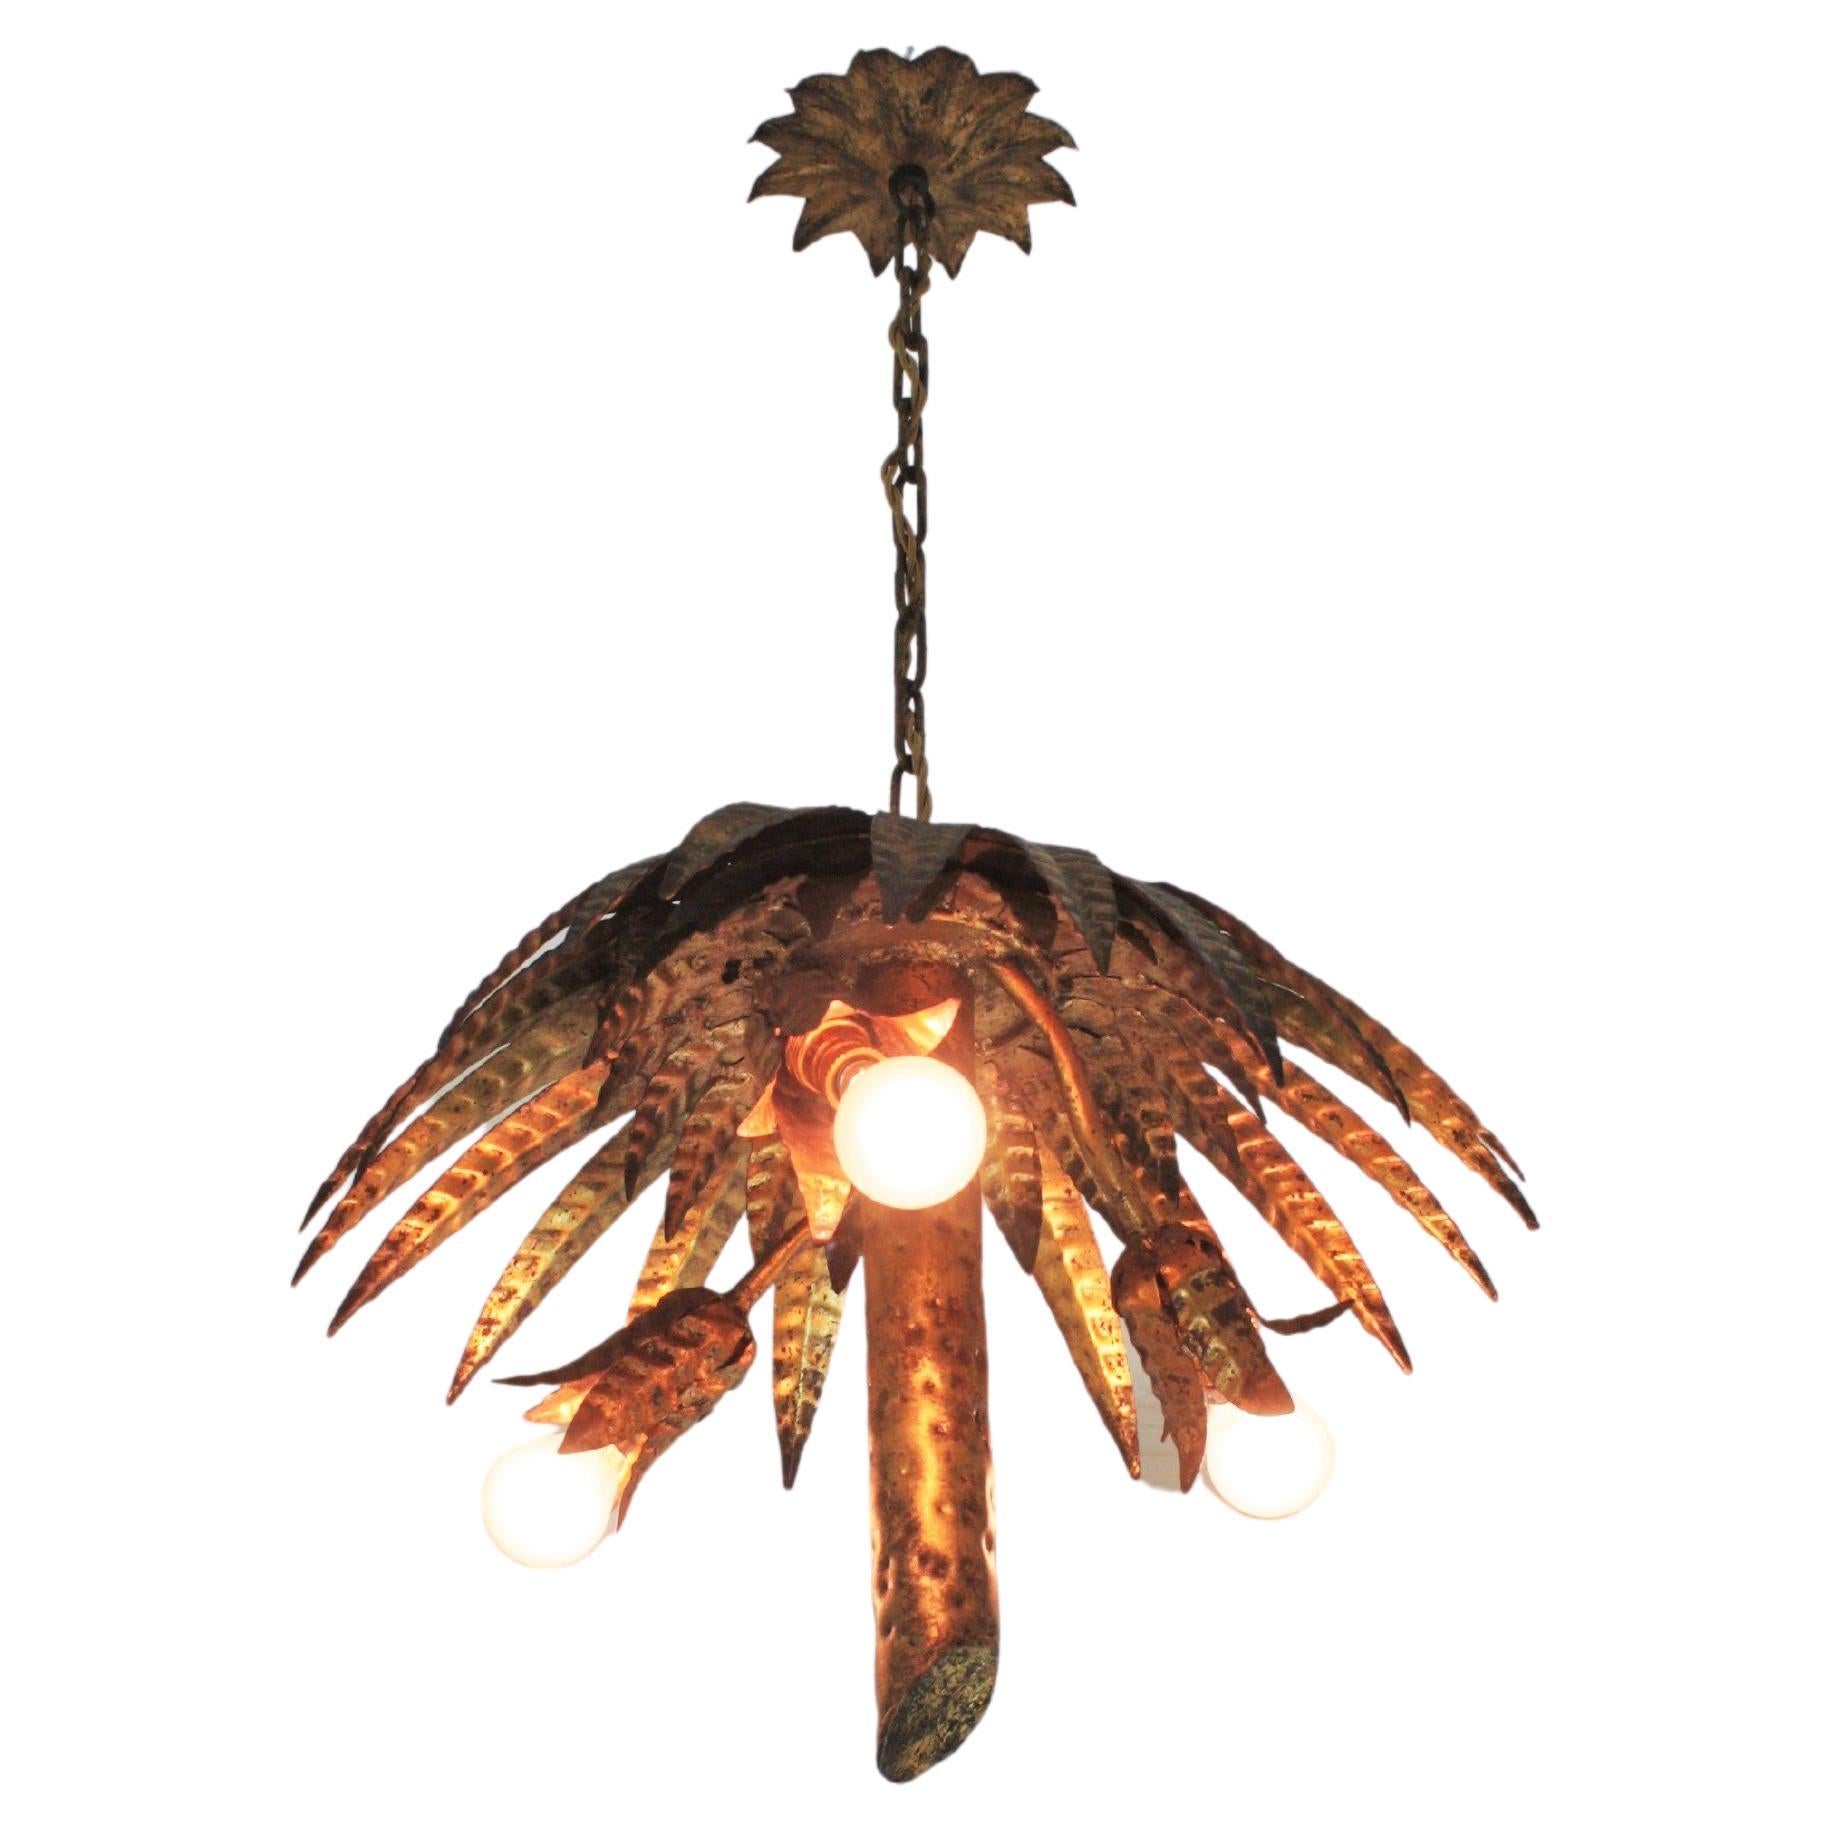 Hollywood Regency Palm Tree Pendant Light, Gilt Iron, Gold Leaf
Eye-catching hand-hammered gilt iron palm tree ceiling light fixture or pendant. Spain, 1950s.
This ceiling lamp is entirely made by hand. Featuring has two layers of leaves as a palm